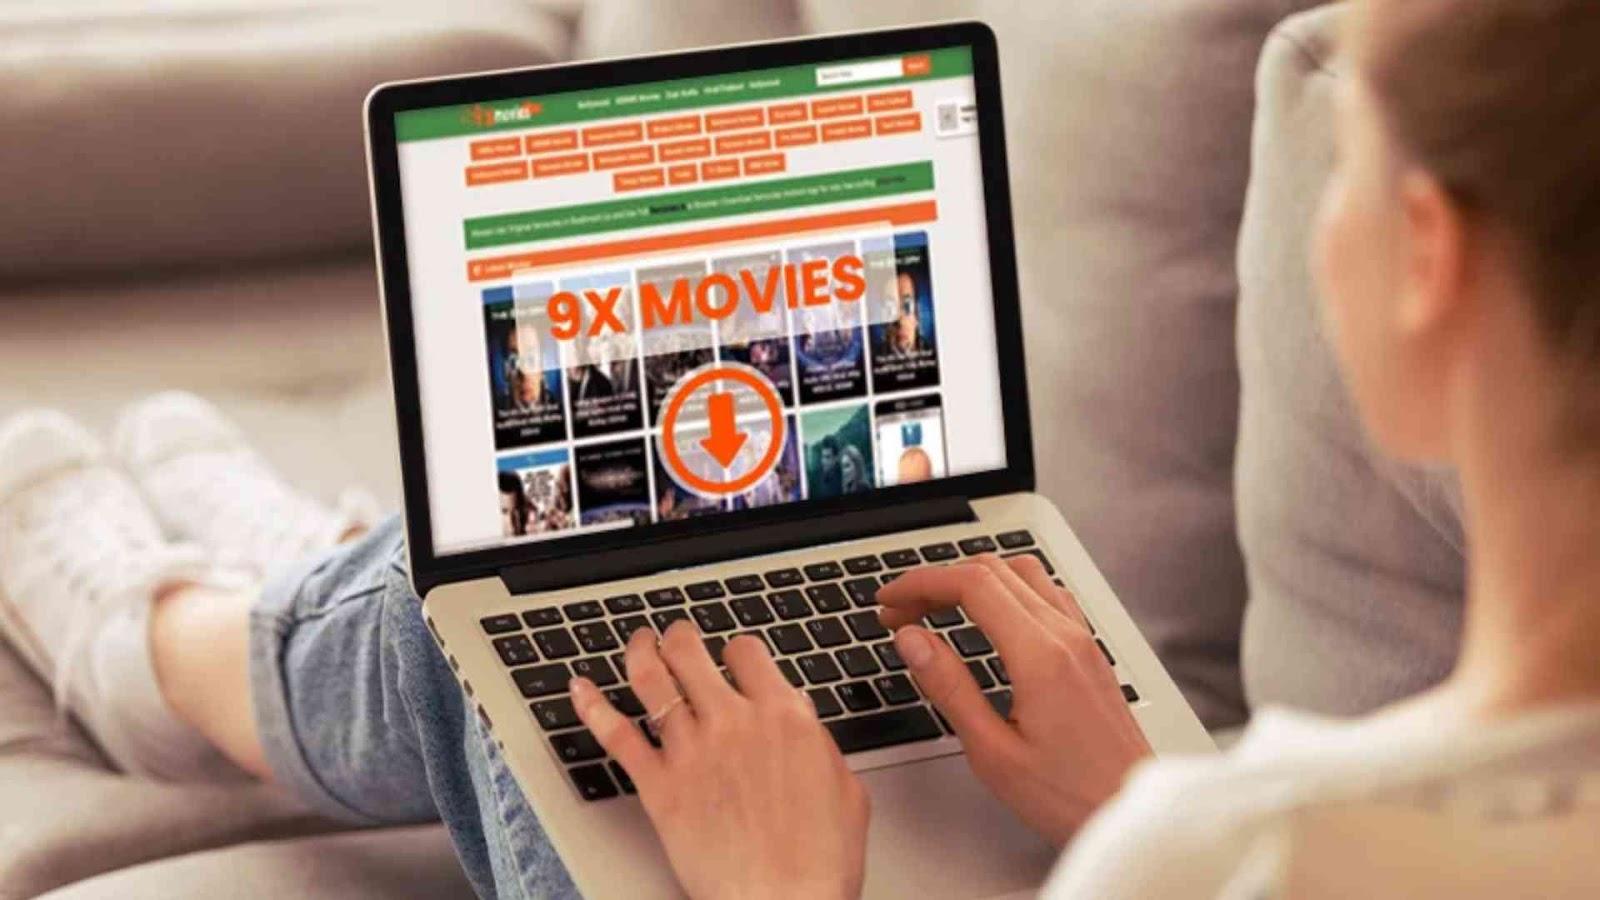 What is 9xMovies